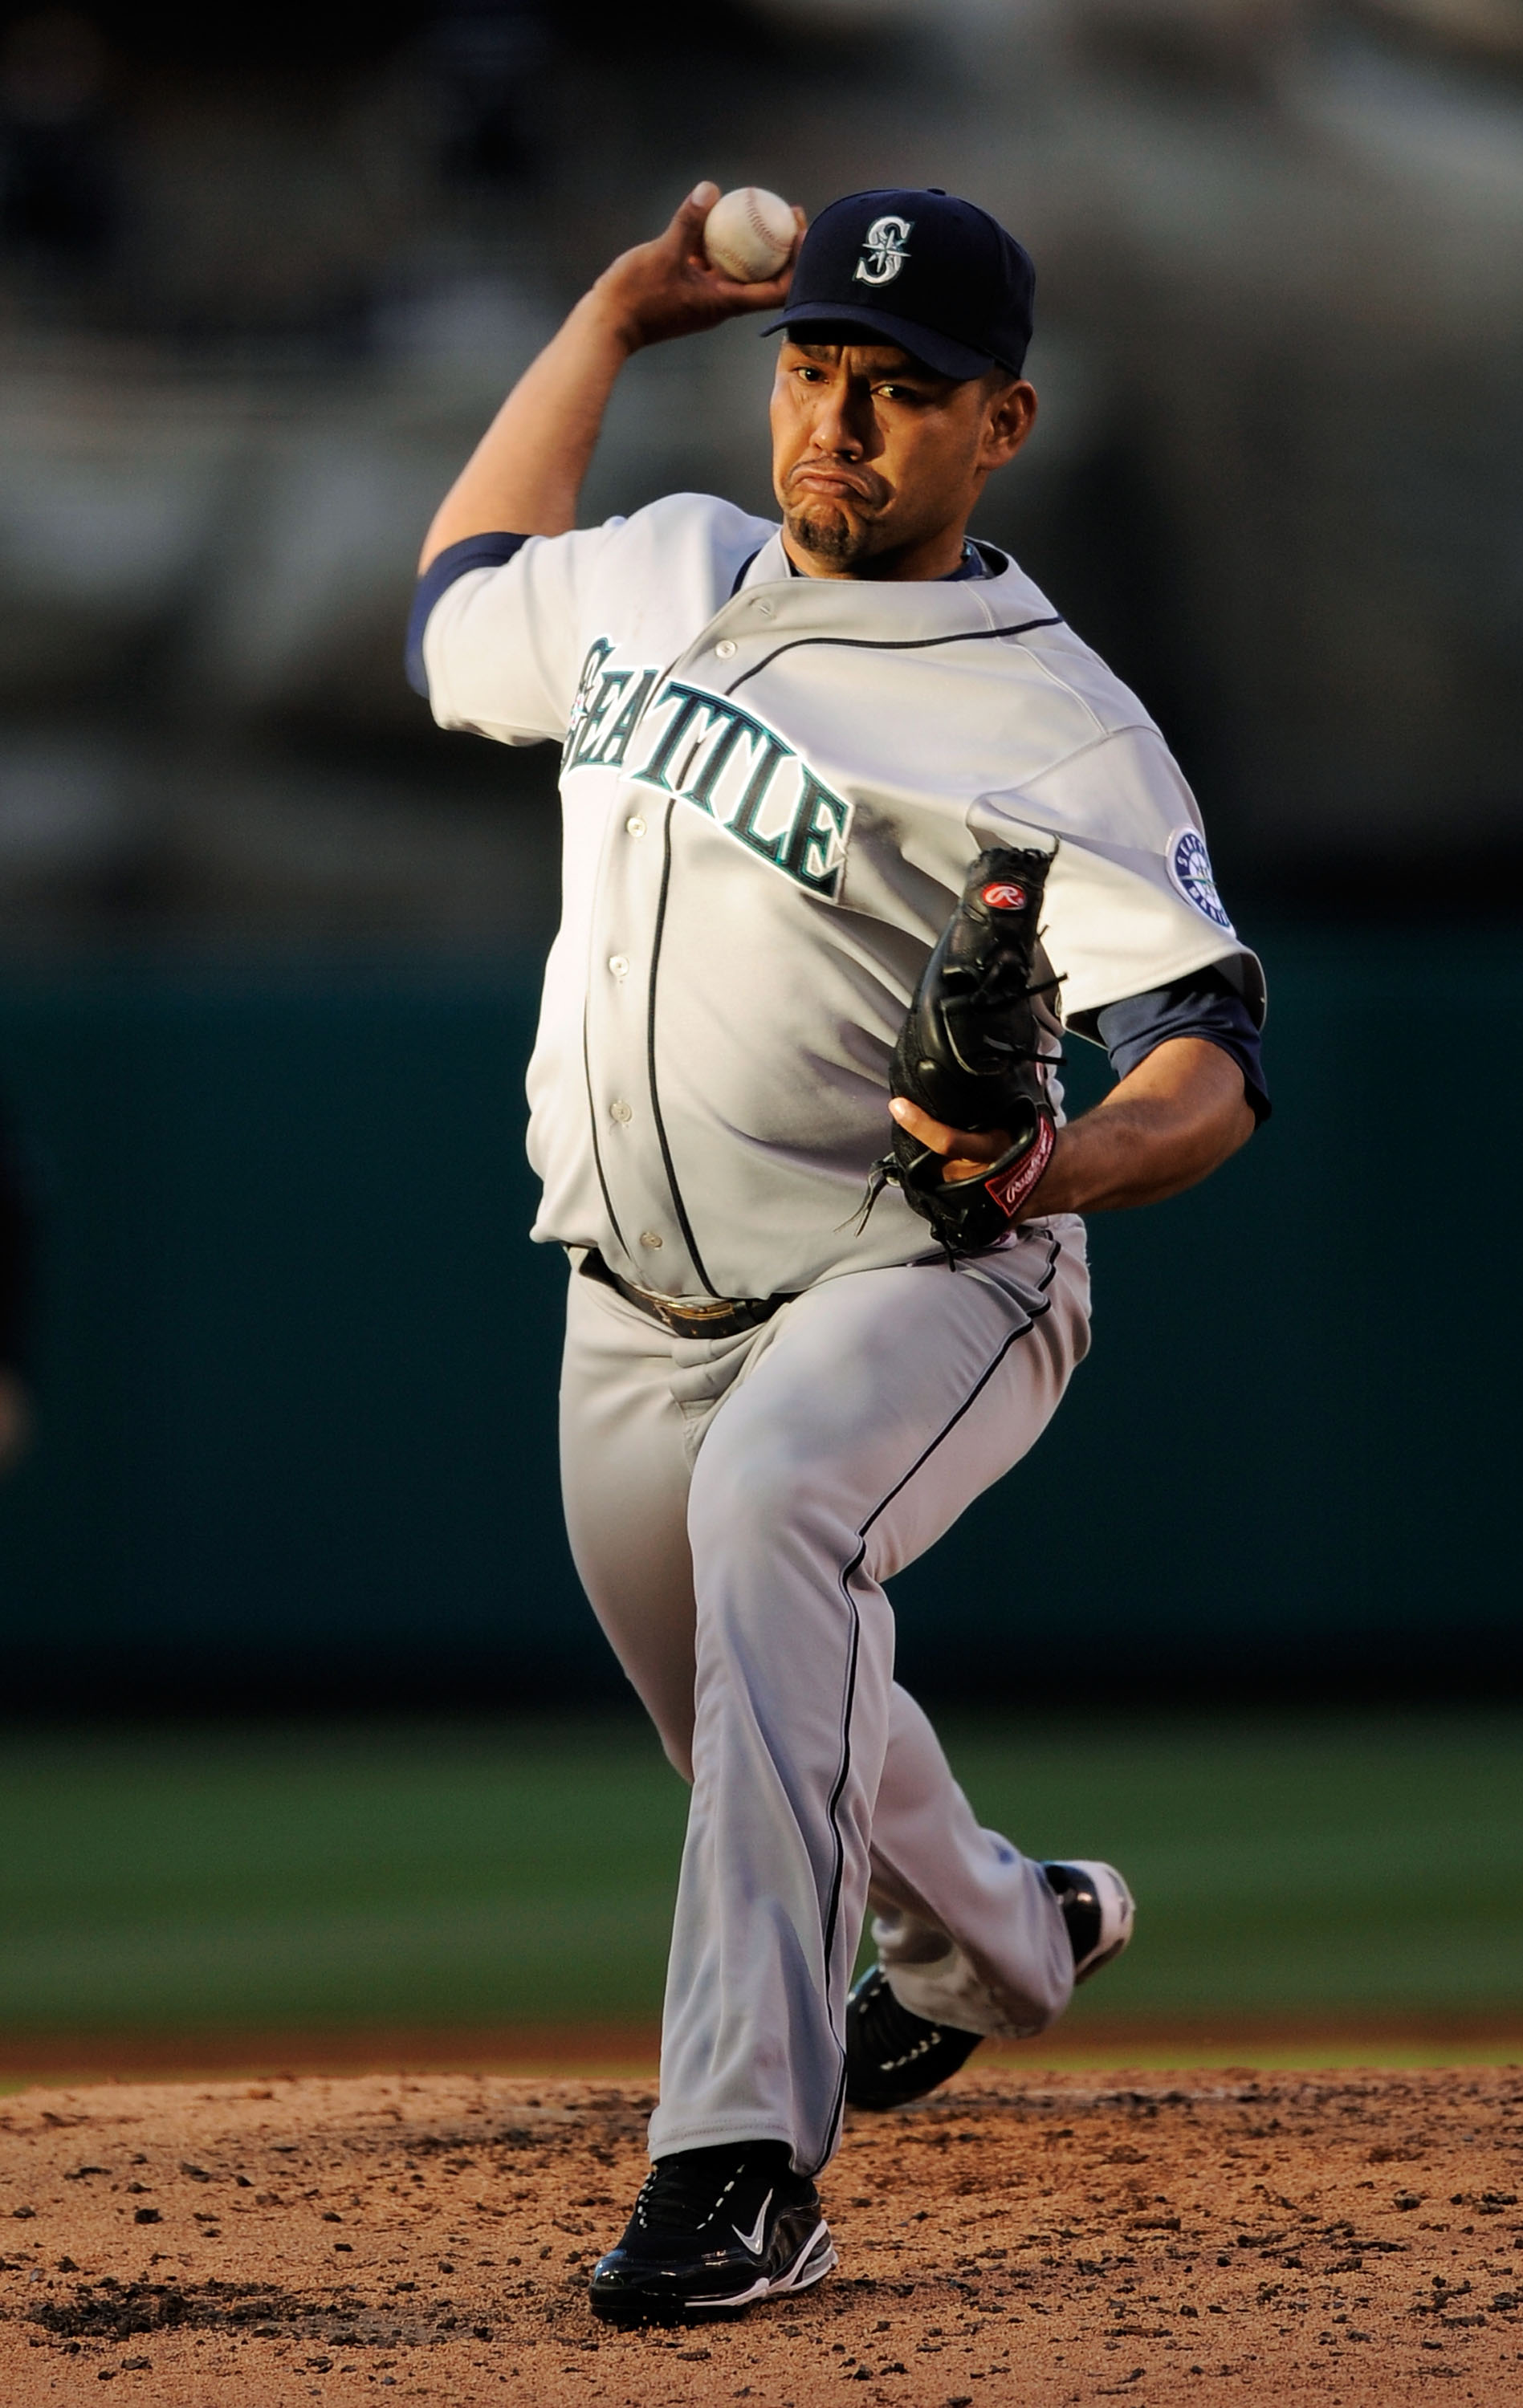 ANAHEIM, CA - APRIL 25: Pitcher Carlos Silva #52 of the Seattle Mariners throws against the Los Angeles Angels during the thrid inning of the baseball game on April 25, 2009 at Angel Stadium in Anaheim, California. (photo by kevork Djansezian/Getty Images